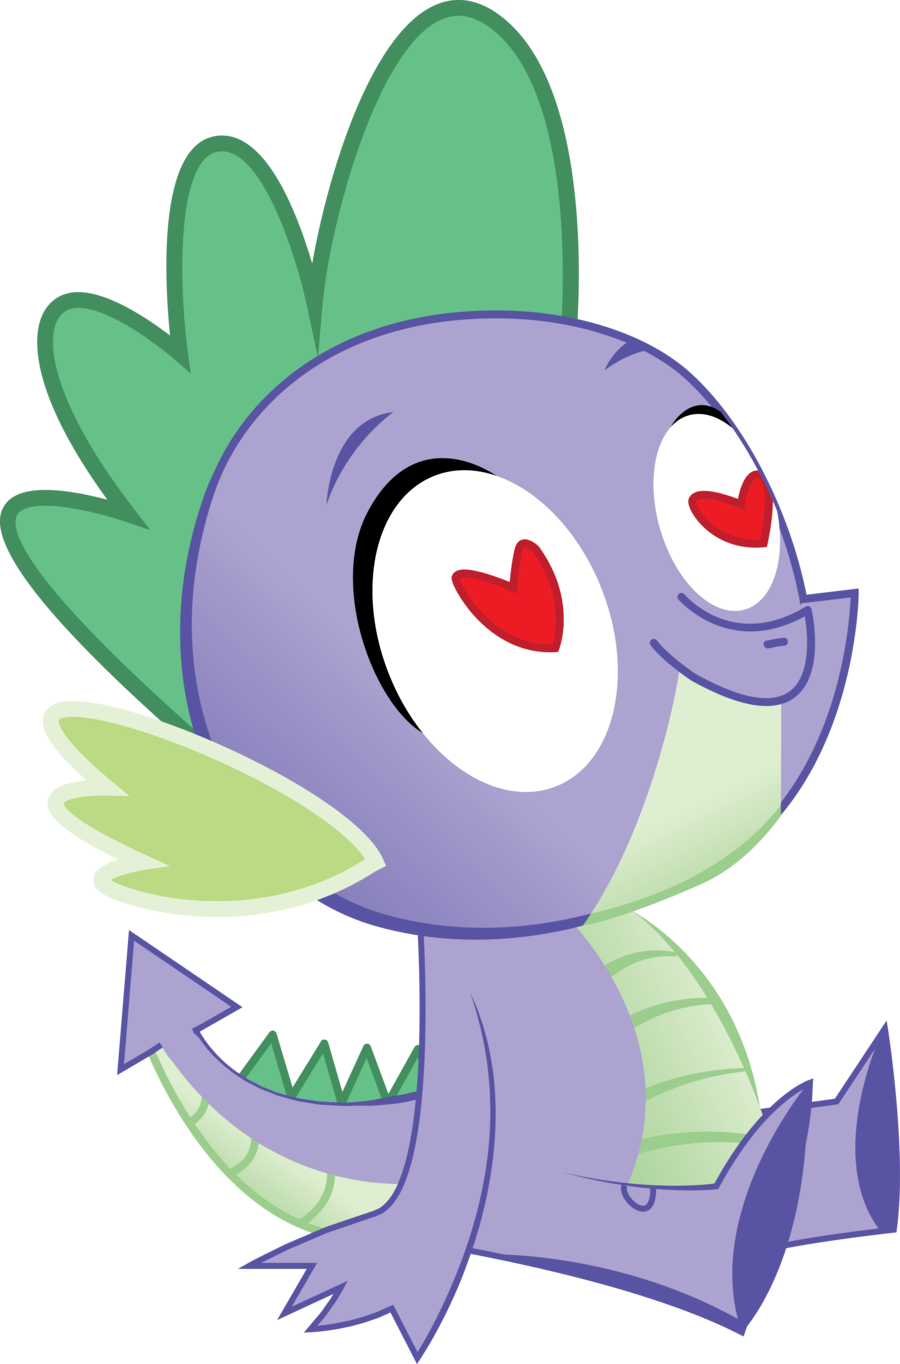 Heart-eyed Spike By Trebory6 - Portable Network Graphics (900x1364)